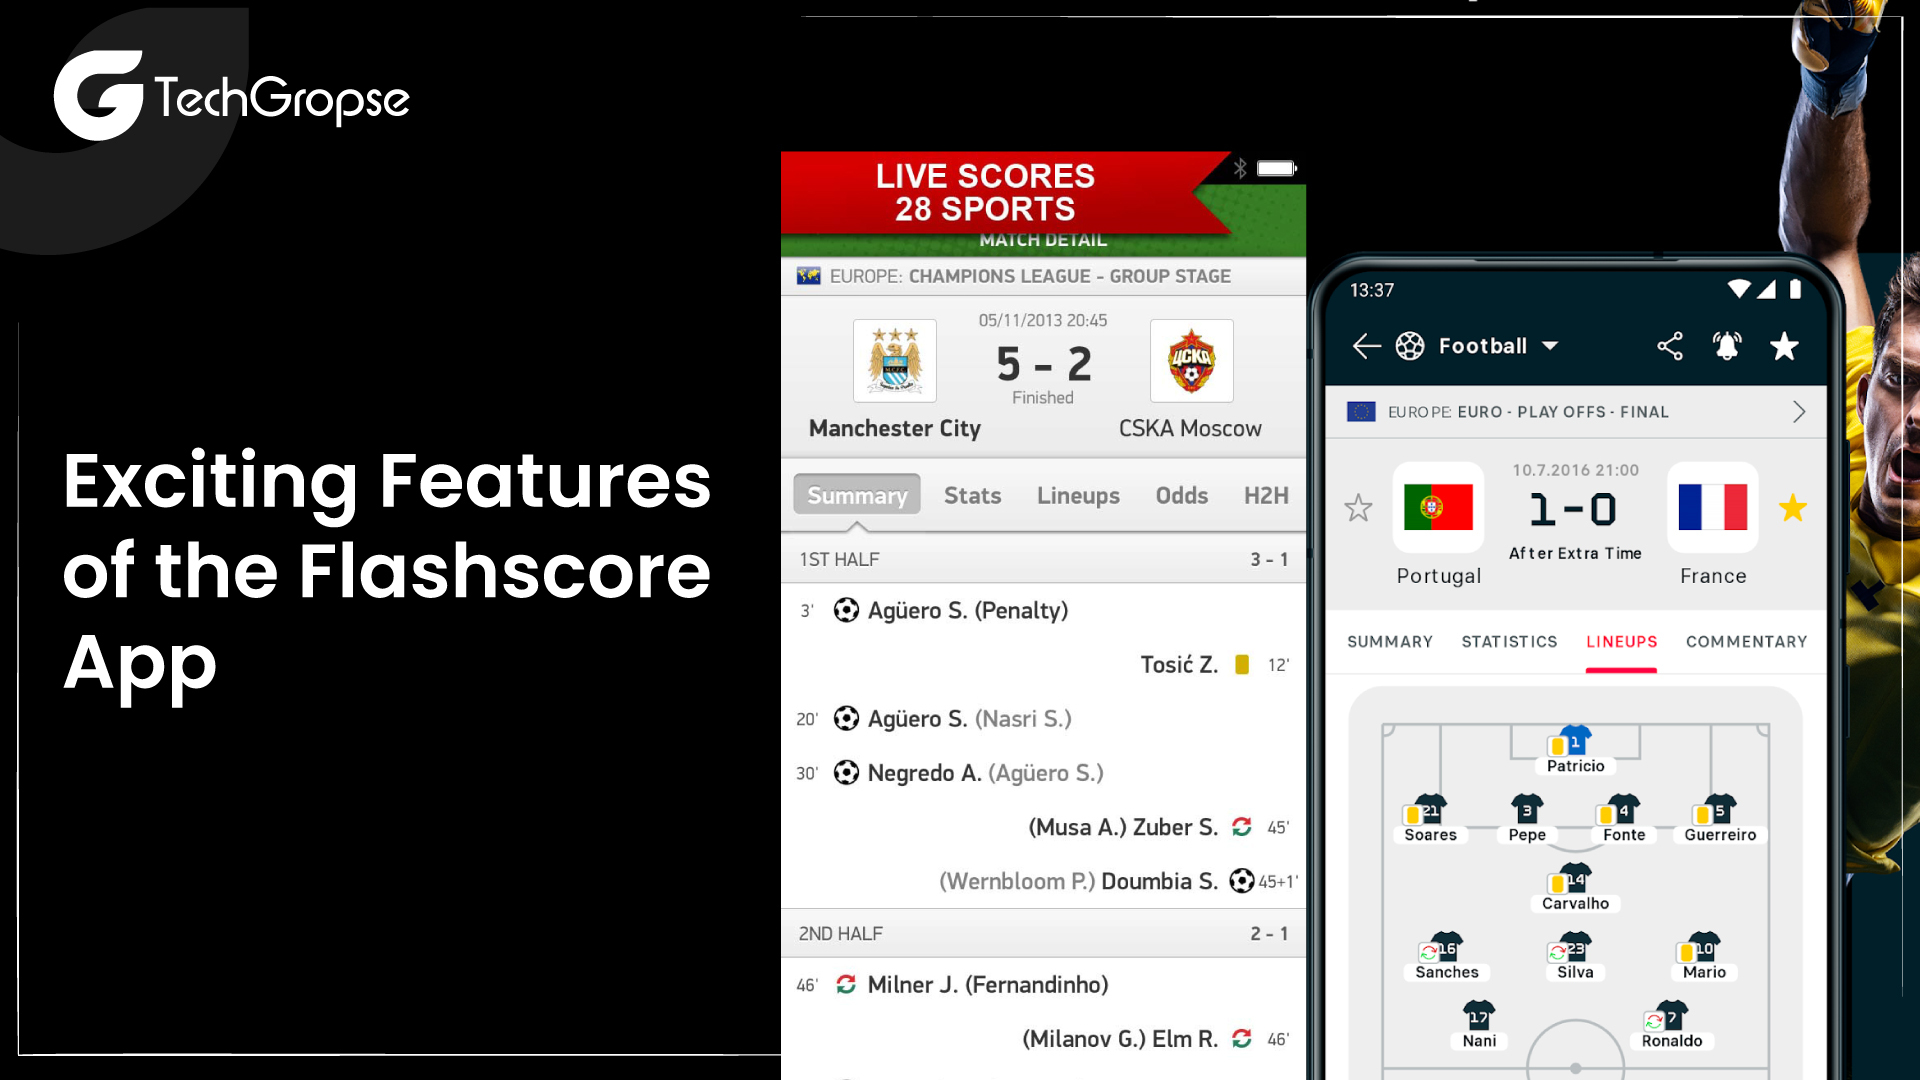 Exciting Feature of the Flashscore App